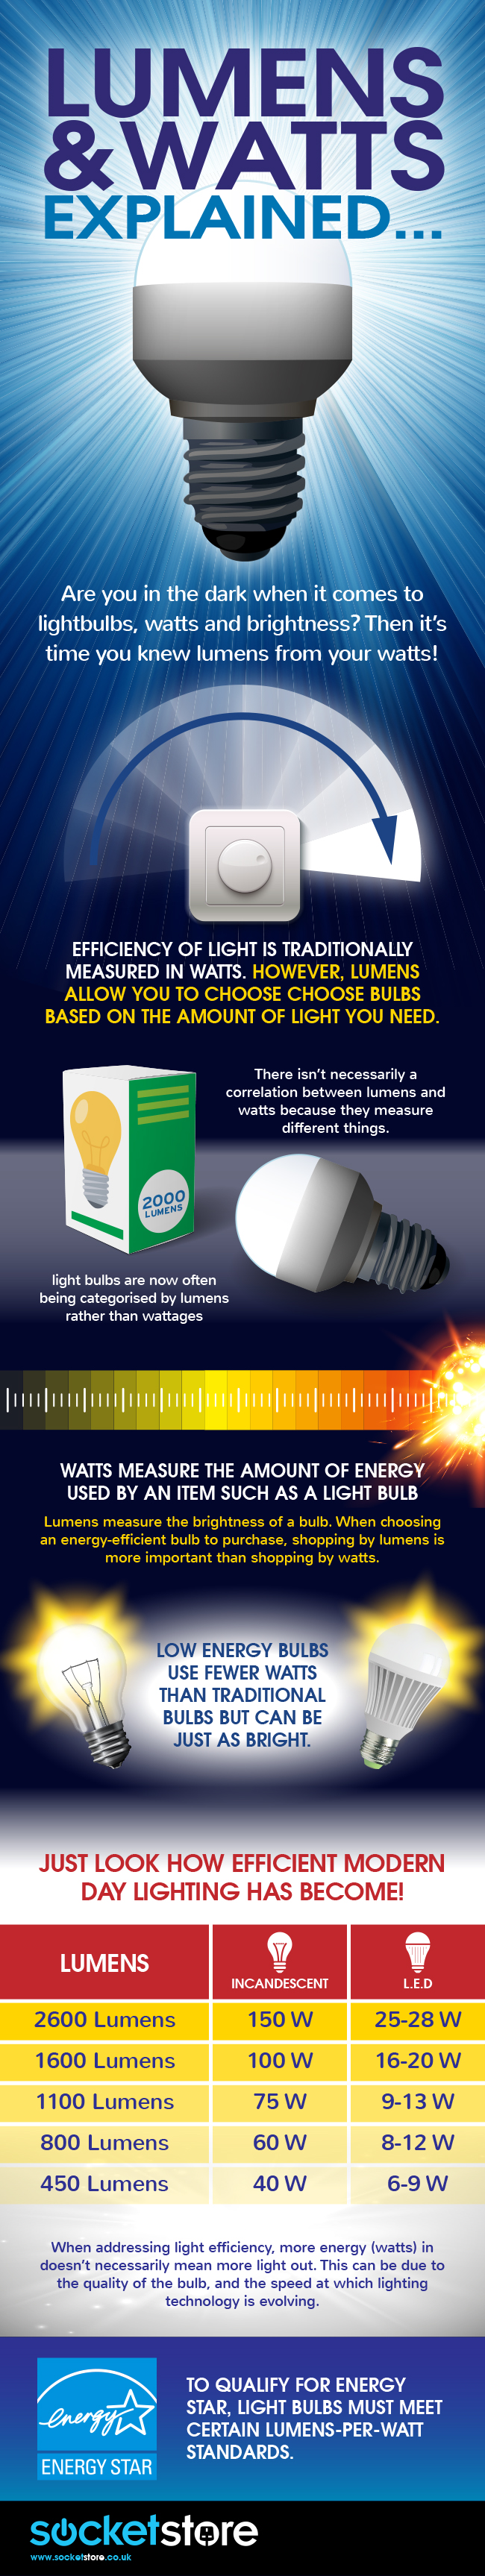 Lumens and Watts Explained